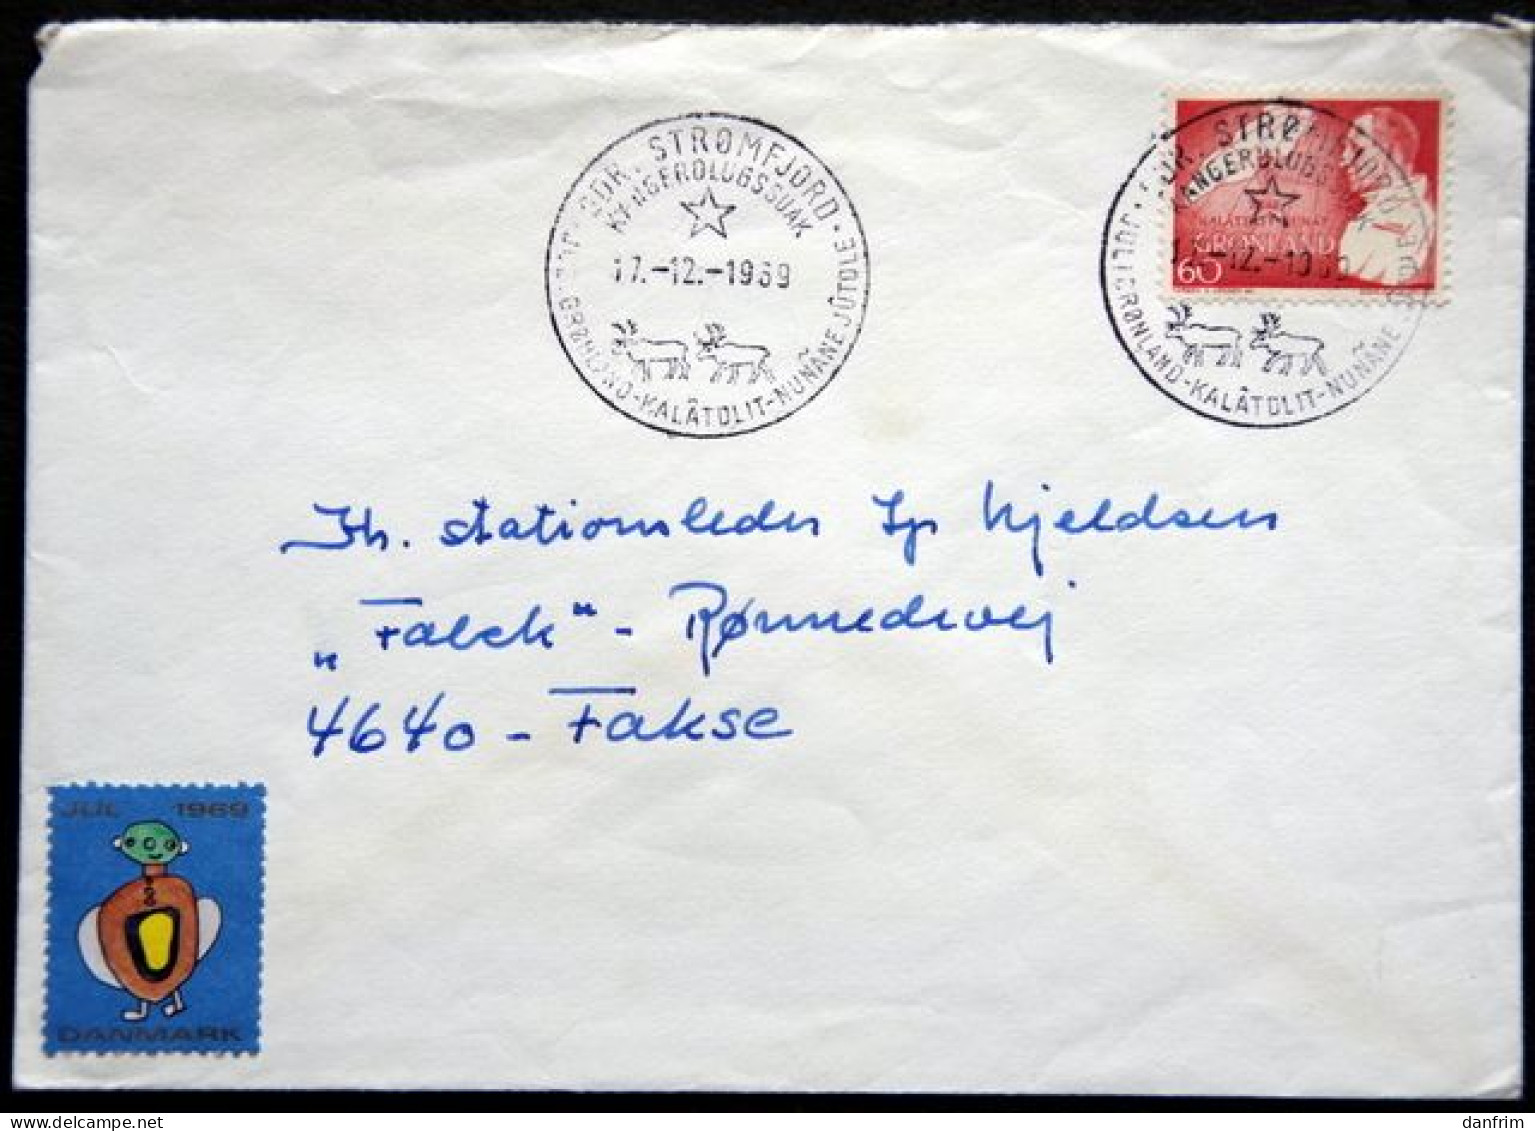 Greenland 1969 Sdr. Strömfjord 17-12-1969 With Special Christmas Cancel  ( Lot 4673 ) - Lettres & Documents